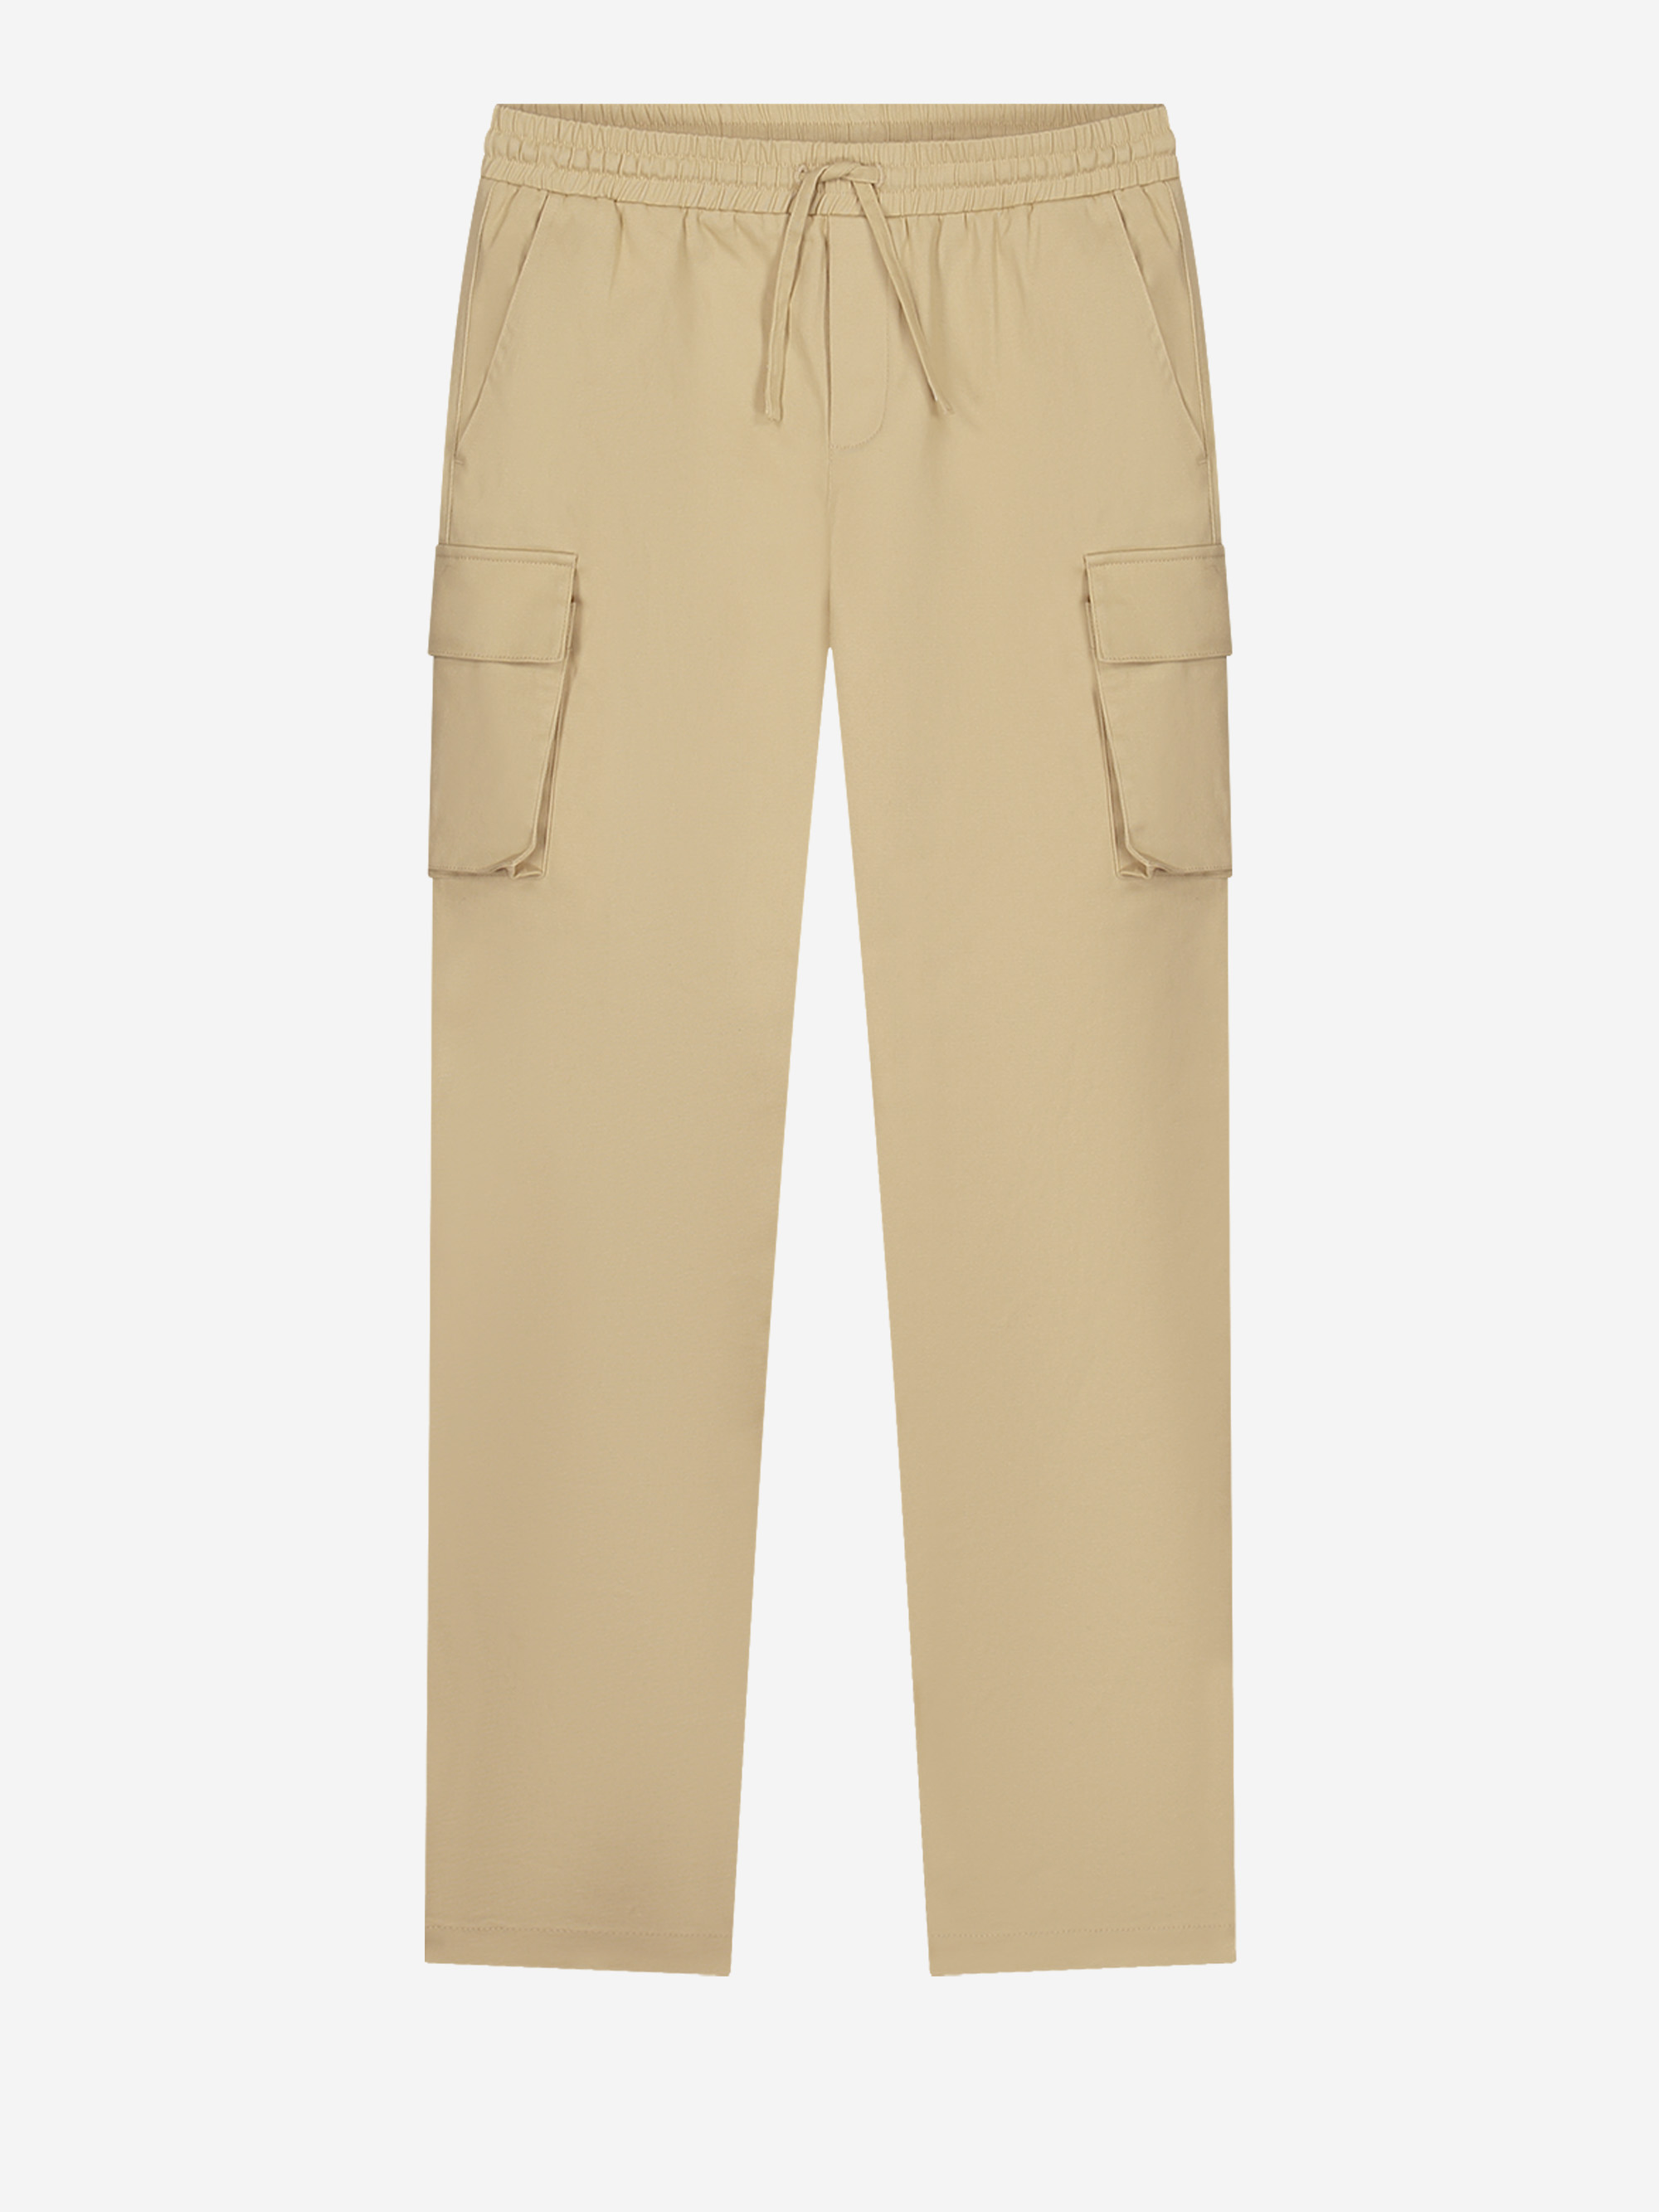 Utility pants with cord